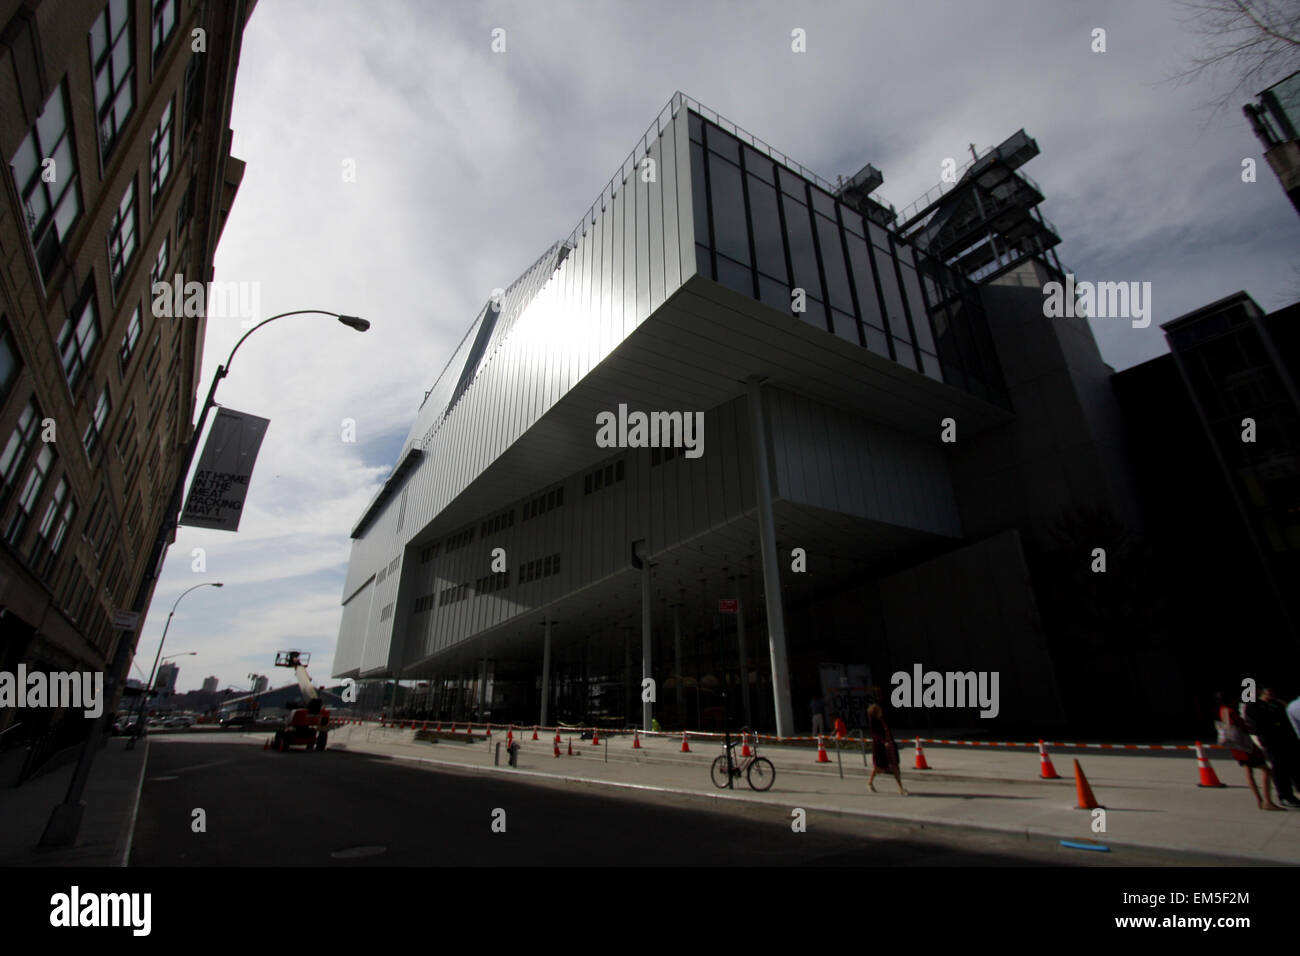 New York, USA. 15th Apr, 2015. Finishing touches are being put on the new Whitney Museum of American Art building at Washington Street and Gansevoort Street, in New York City's Meatpacking District at the end of the High Line.   Designed by architect Renzo Piano, the 200,000-square-foot space will open to the public on May 1st, 2015        London 2012  - Olympics:   Swimming Practice        London 2012  - Olympics:  Diving Practice.        London 2012  - Olympics:  Swimming Practice. Credit:  Adam Stoltman/Alamy Live News Stock Photo